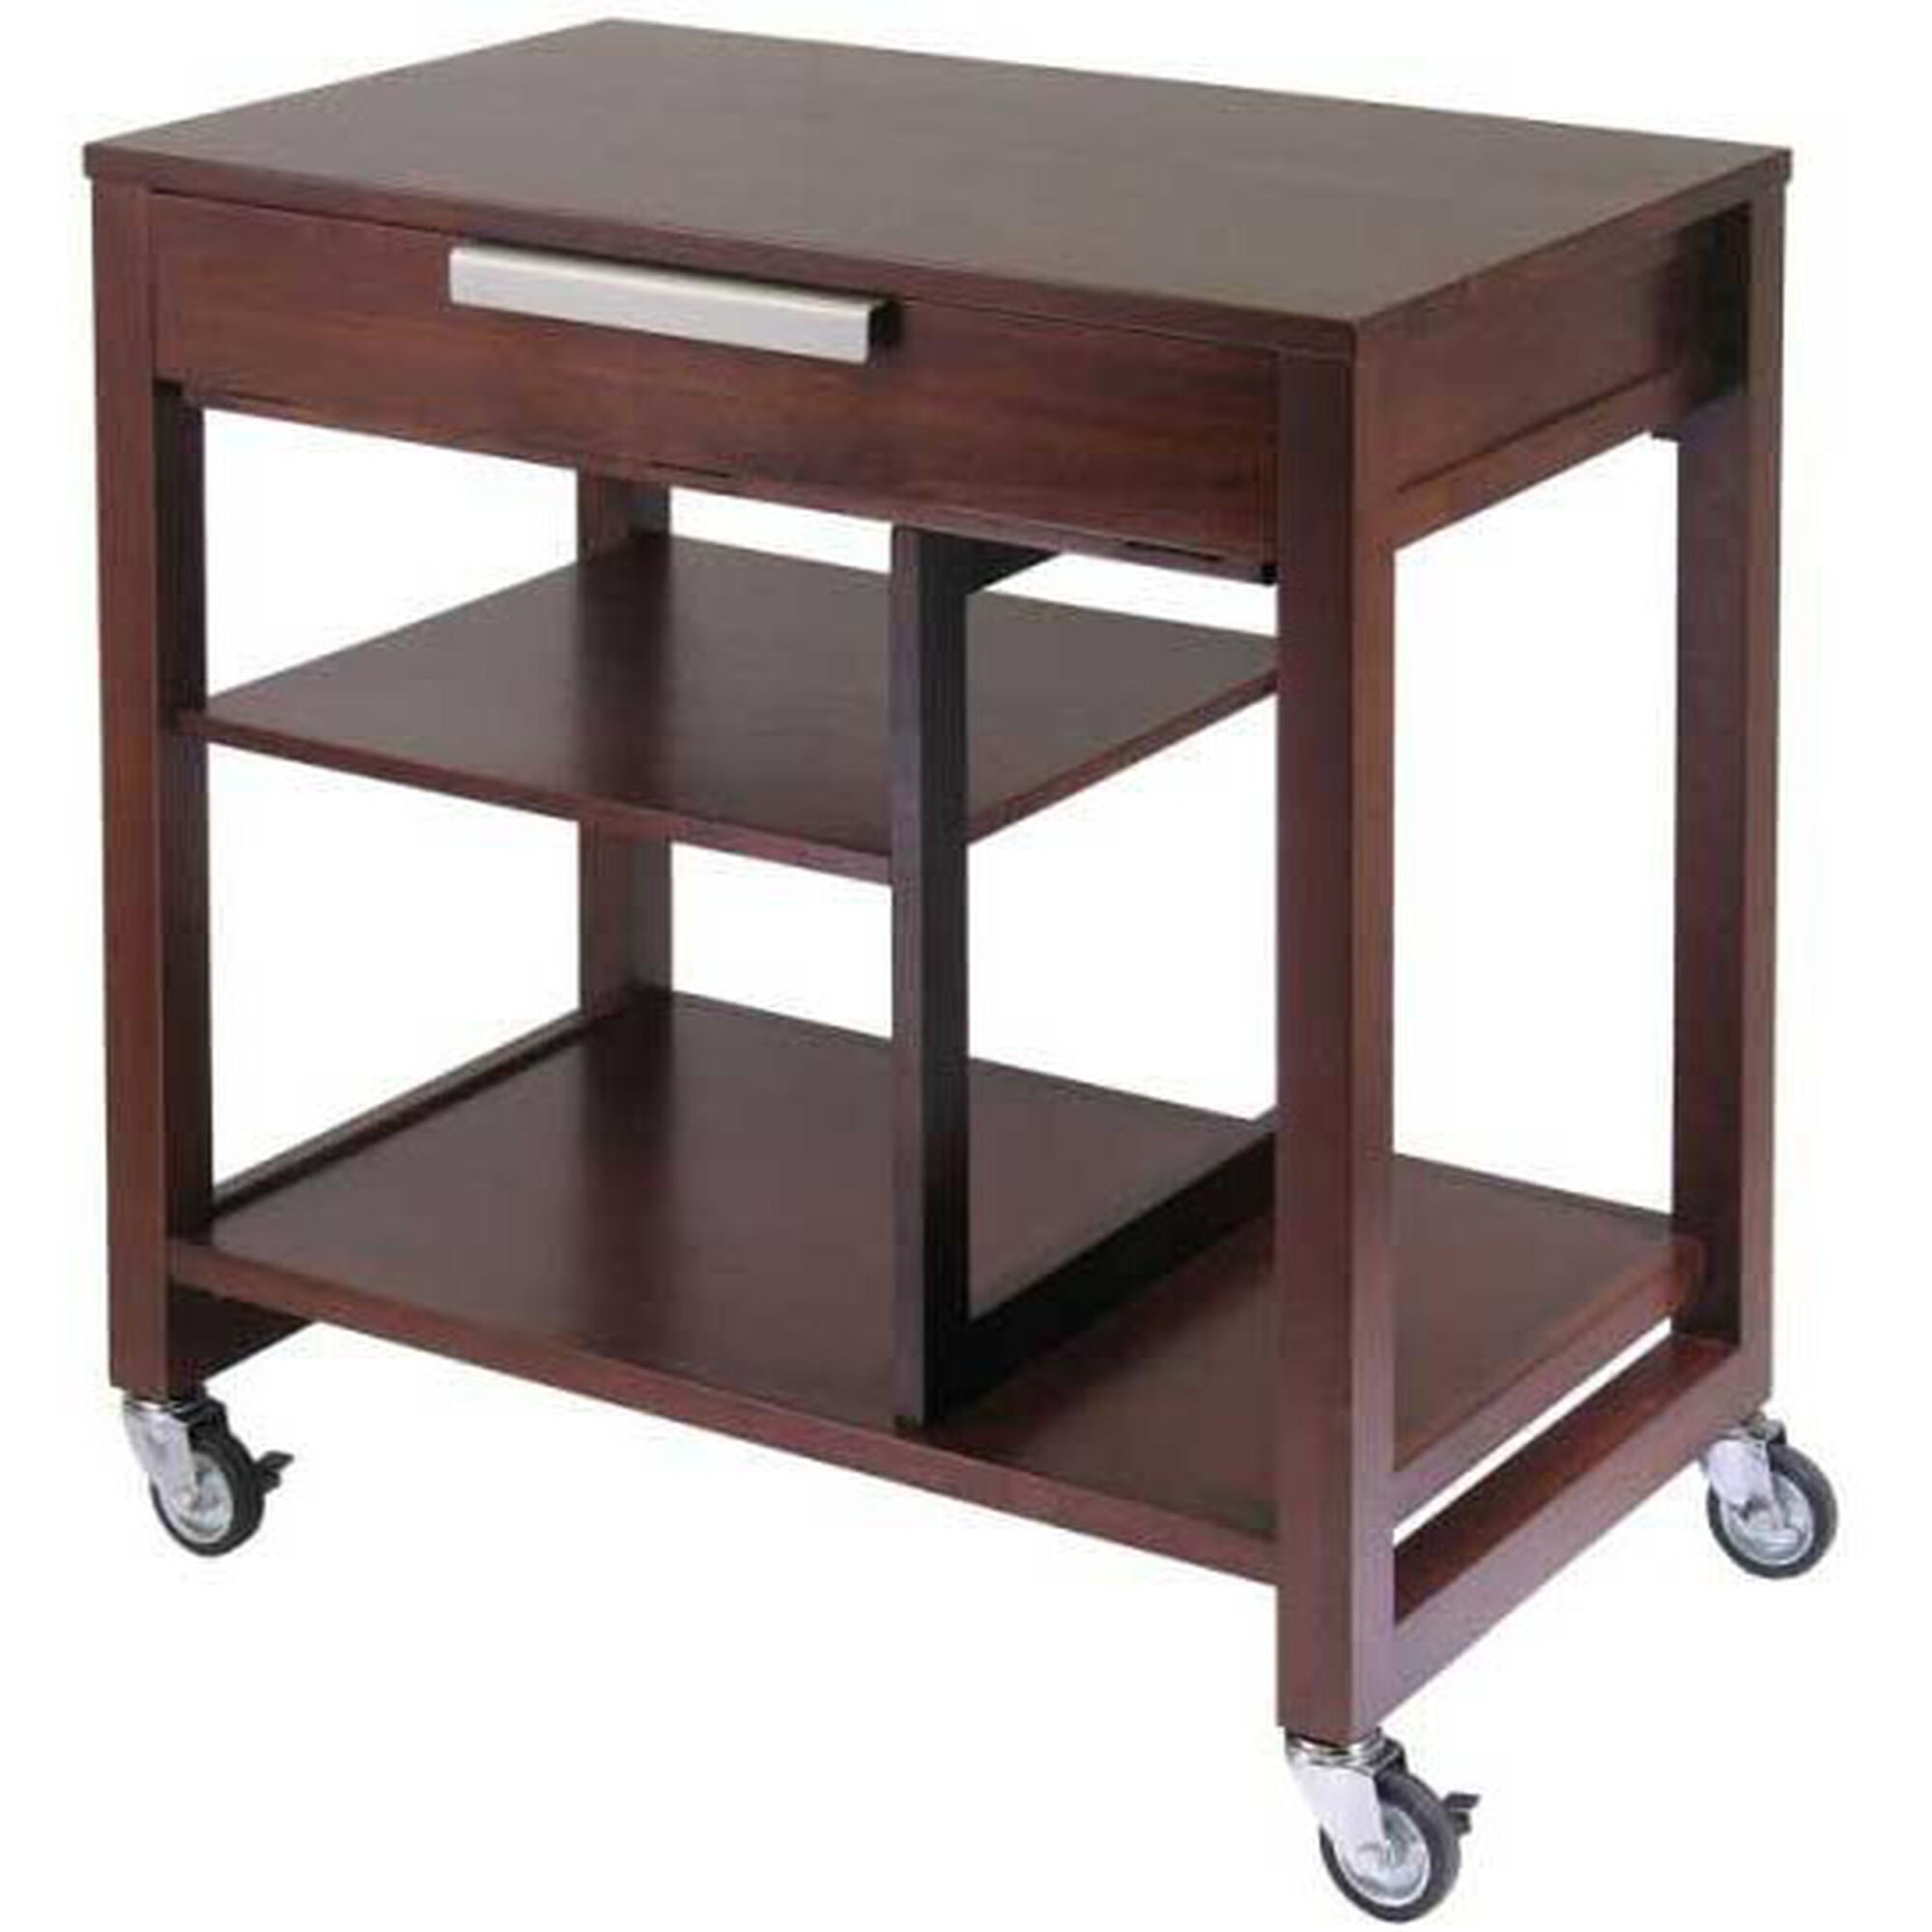 Table on casters